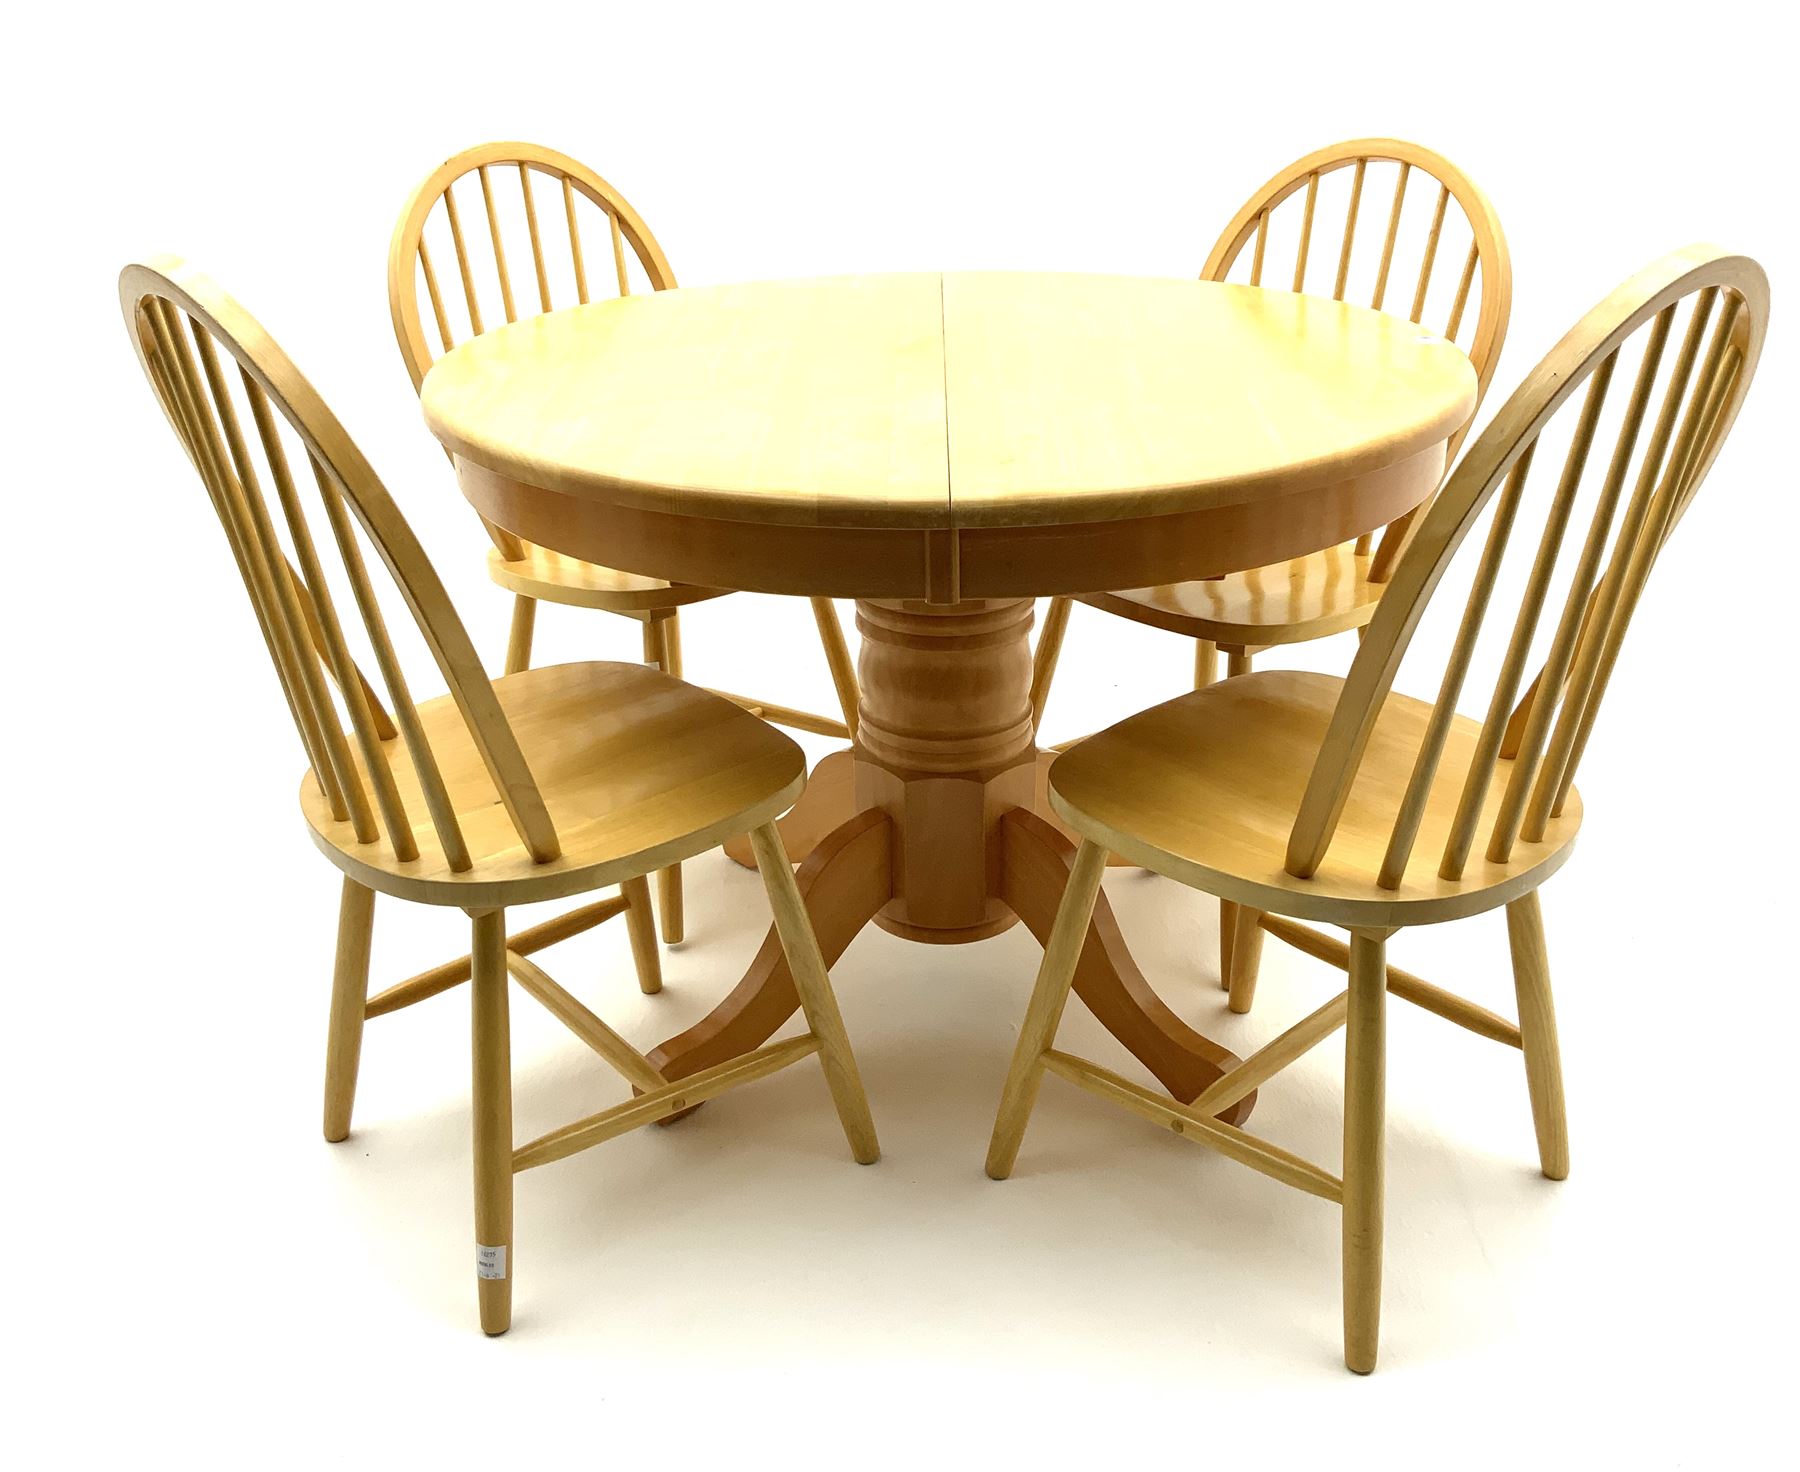 Light wood circular extending dining table and four hoop back chairs